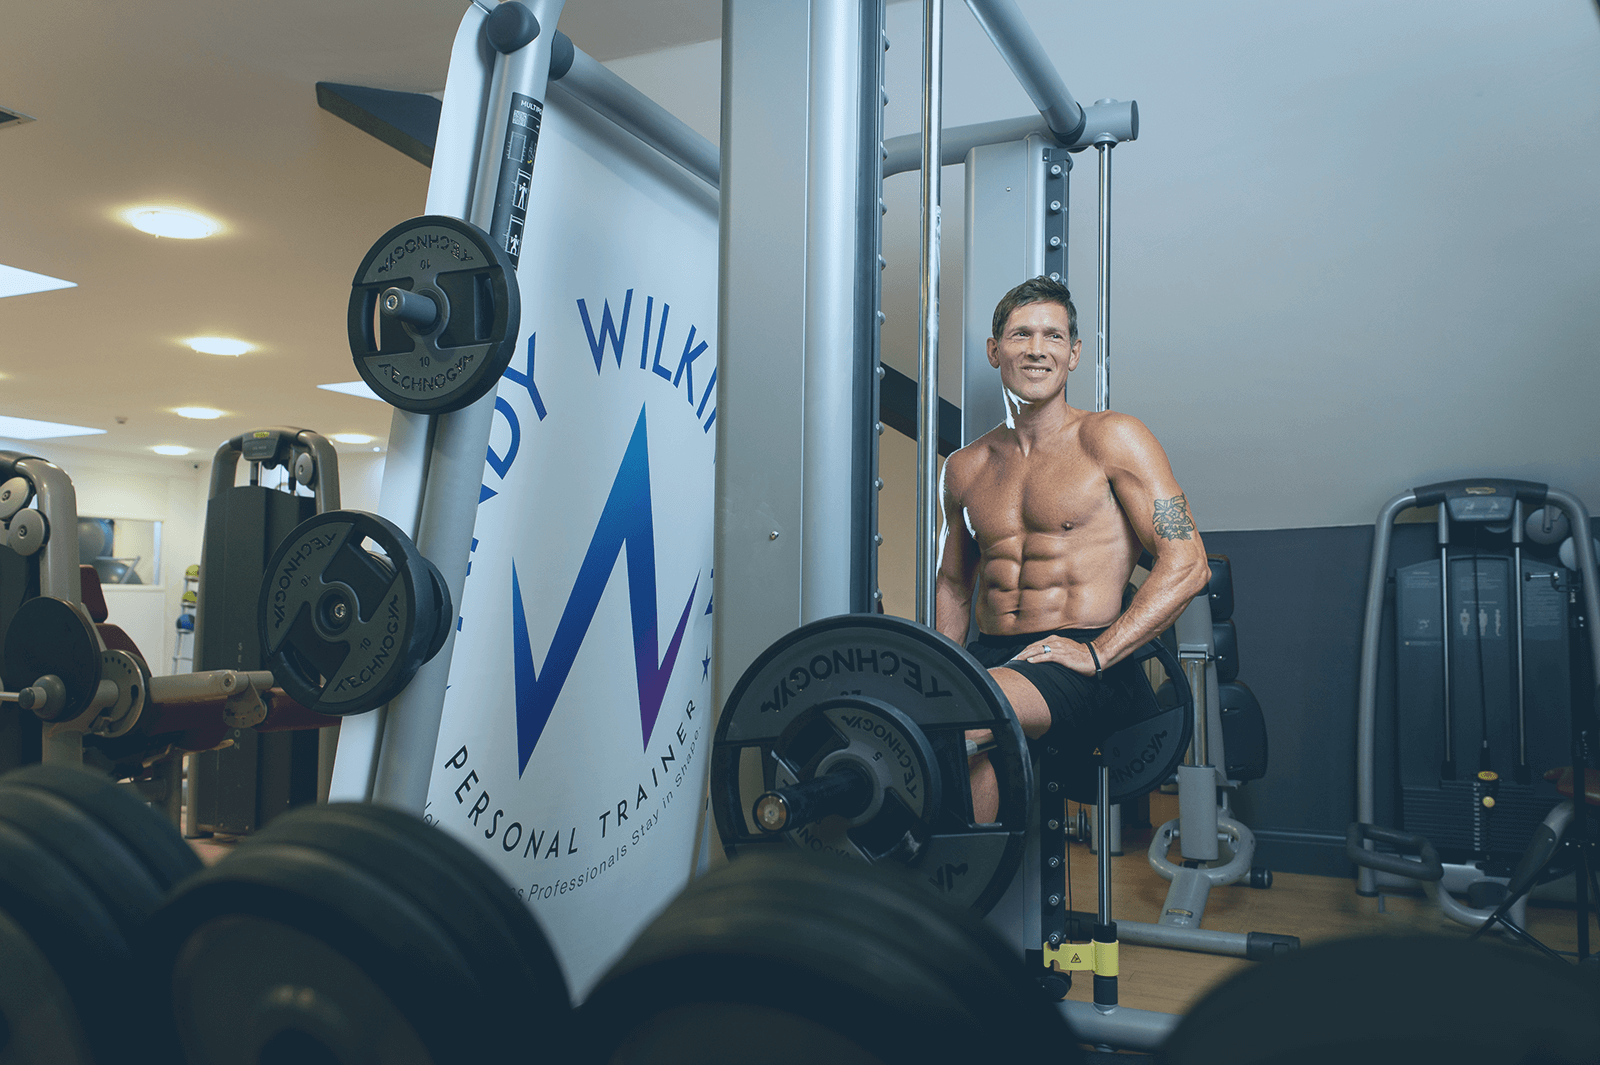 Personal trainer coventry Andy Wilkinson